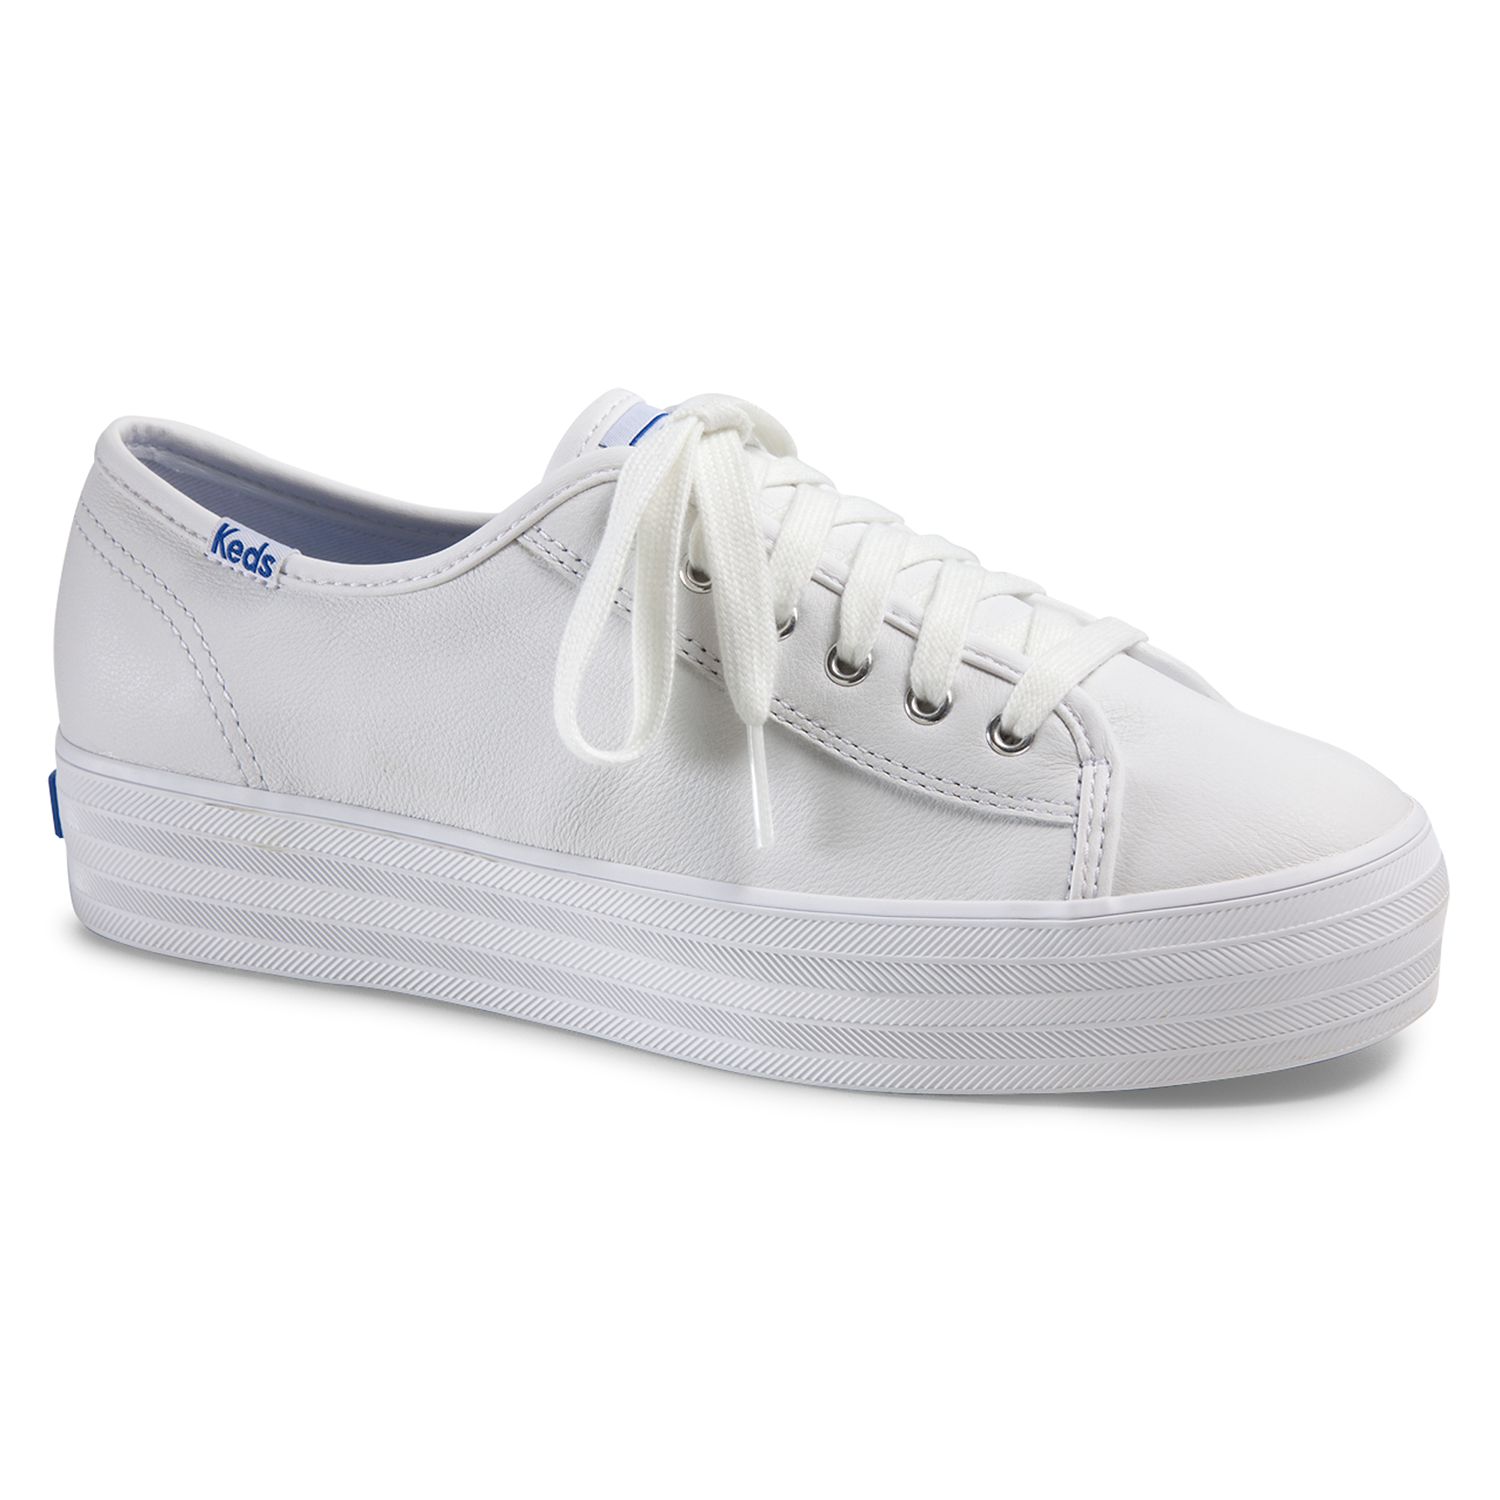 womens keds leather tennis shoes